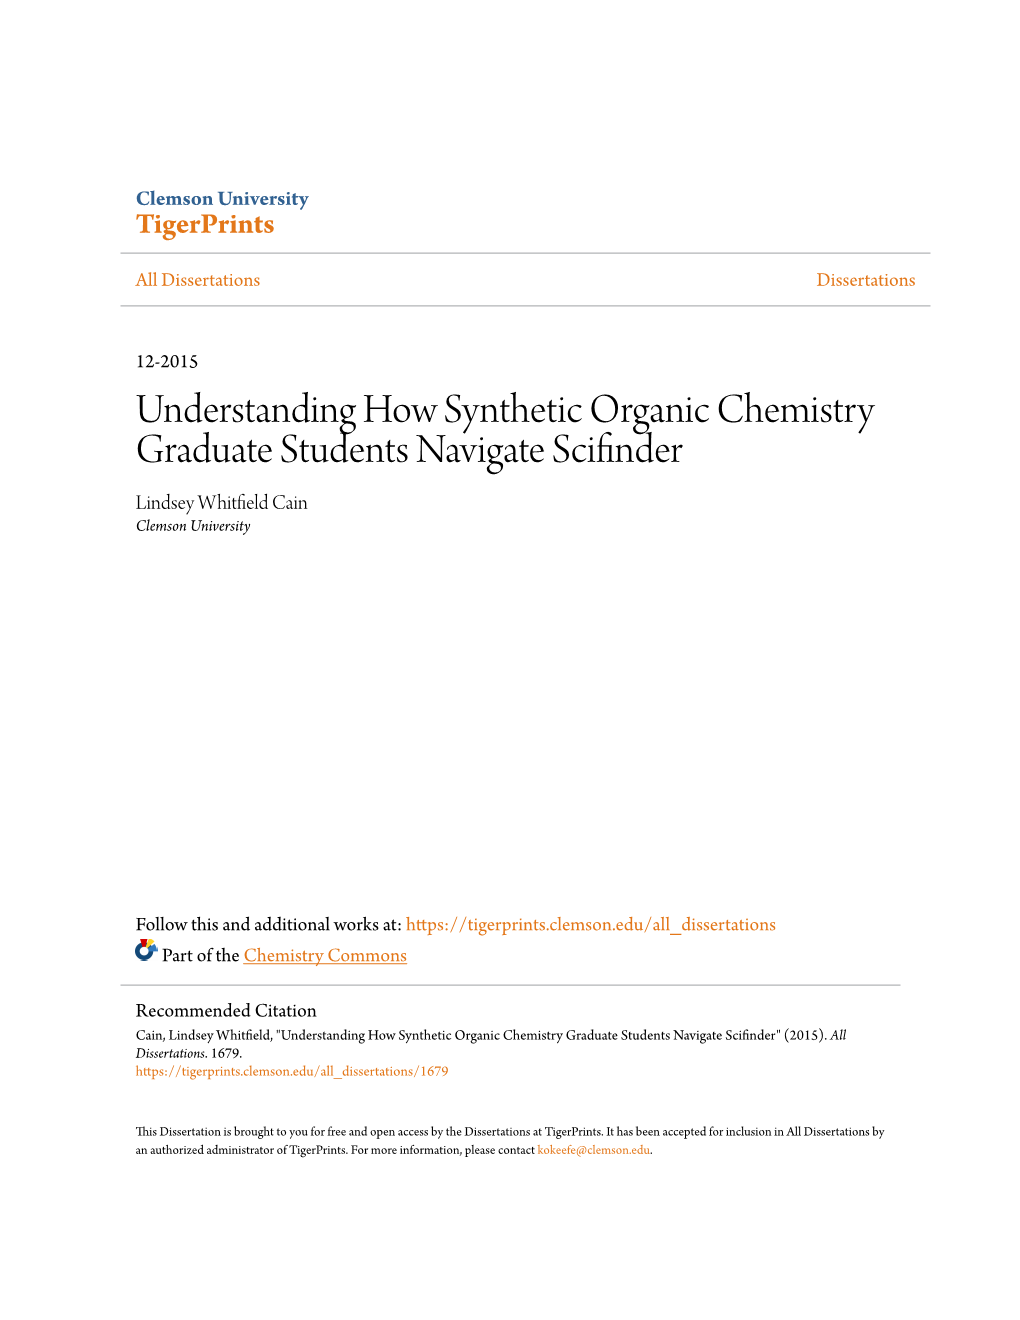 Understanding How Synthetic Organic Chemistry Graduate Students Navigate Scifinder Lindsey Whitfield Ainc Clemson University